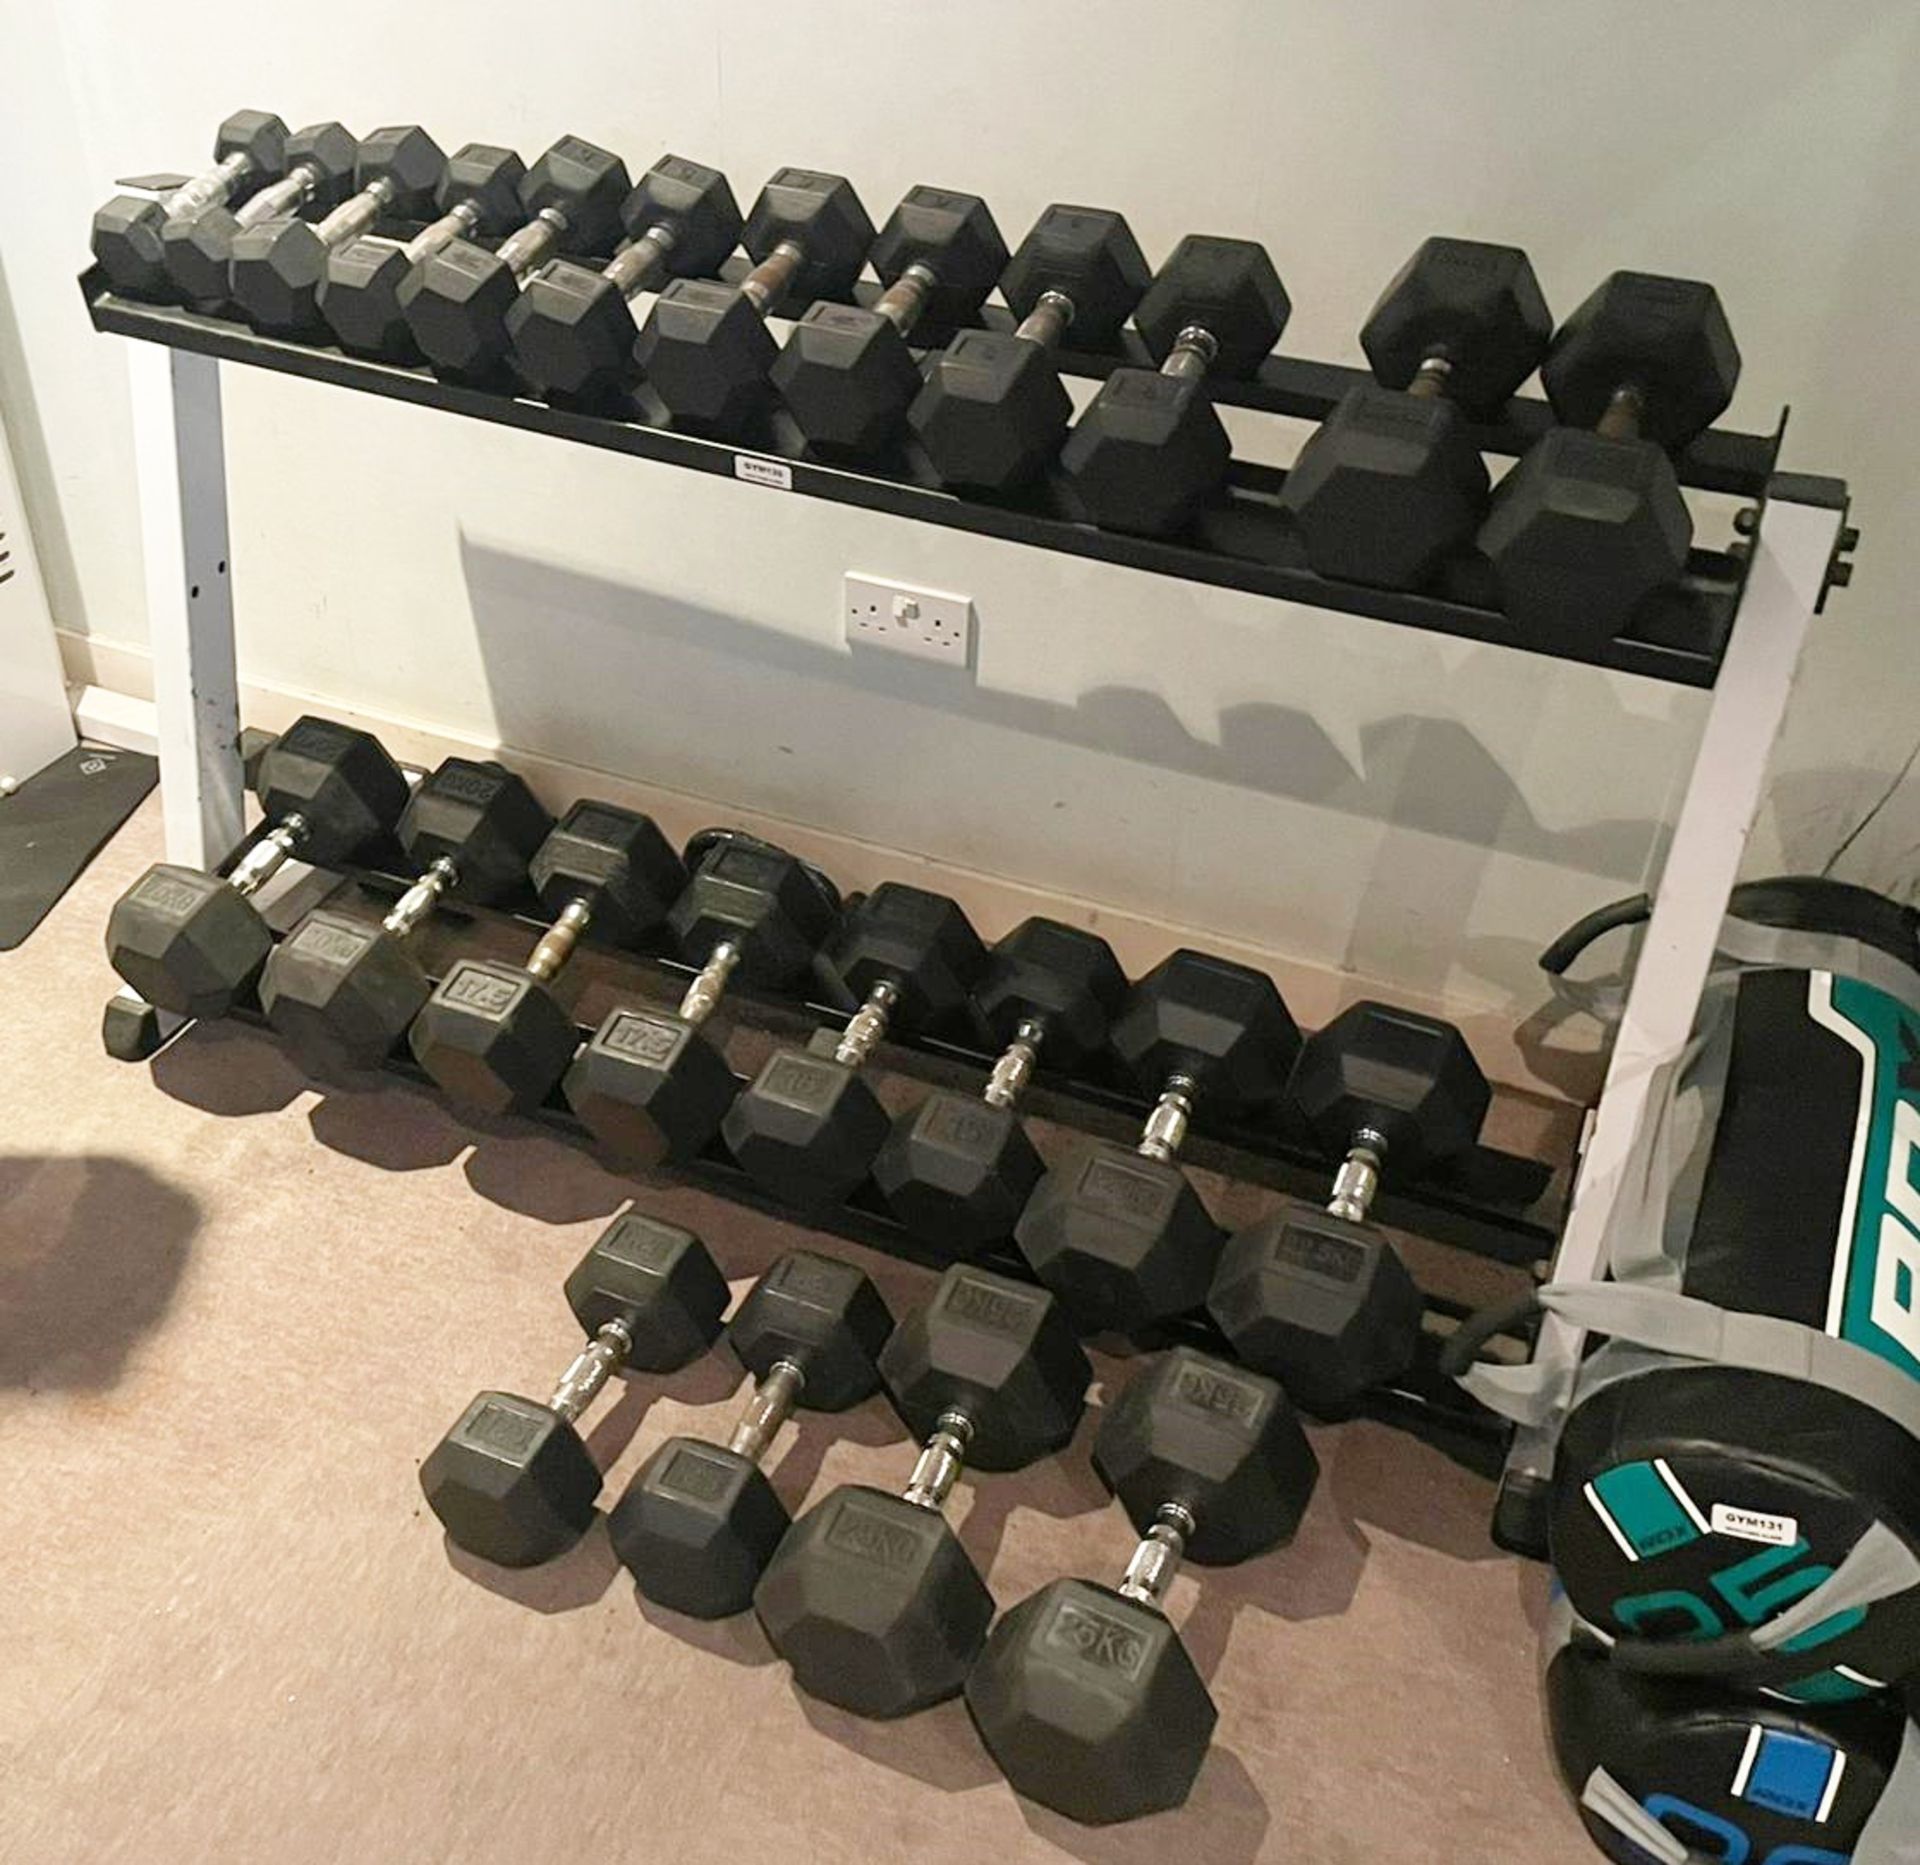 24 x Dumbbell Weight Set With Weight Rack - York and Pulse Brands Included - Commercial Fitness - Image 2 of 2